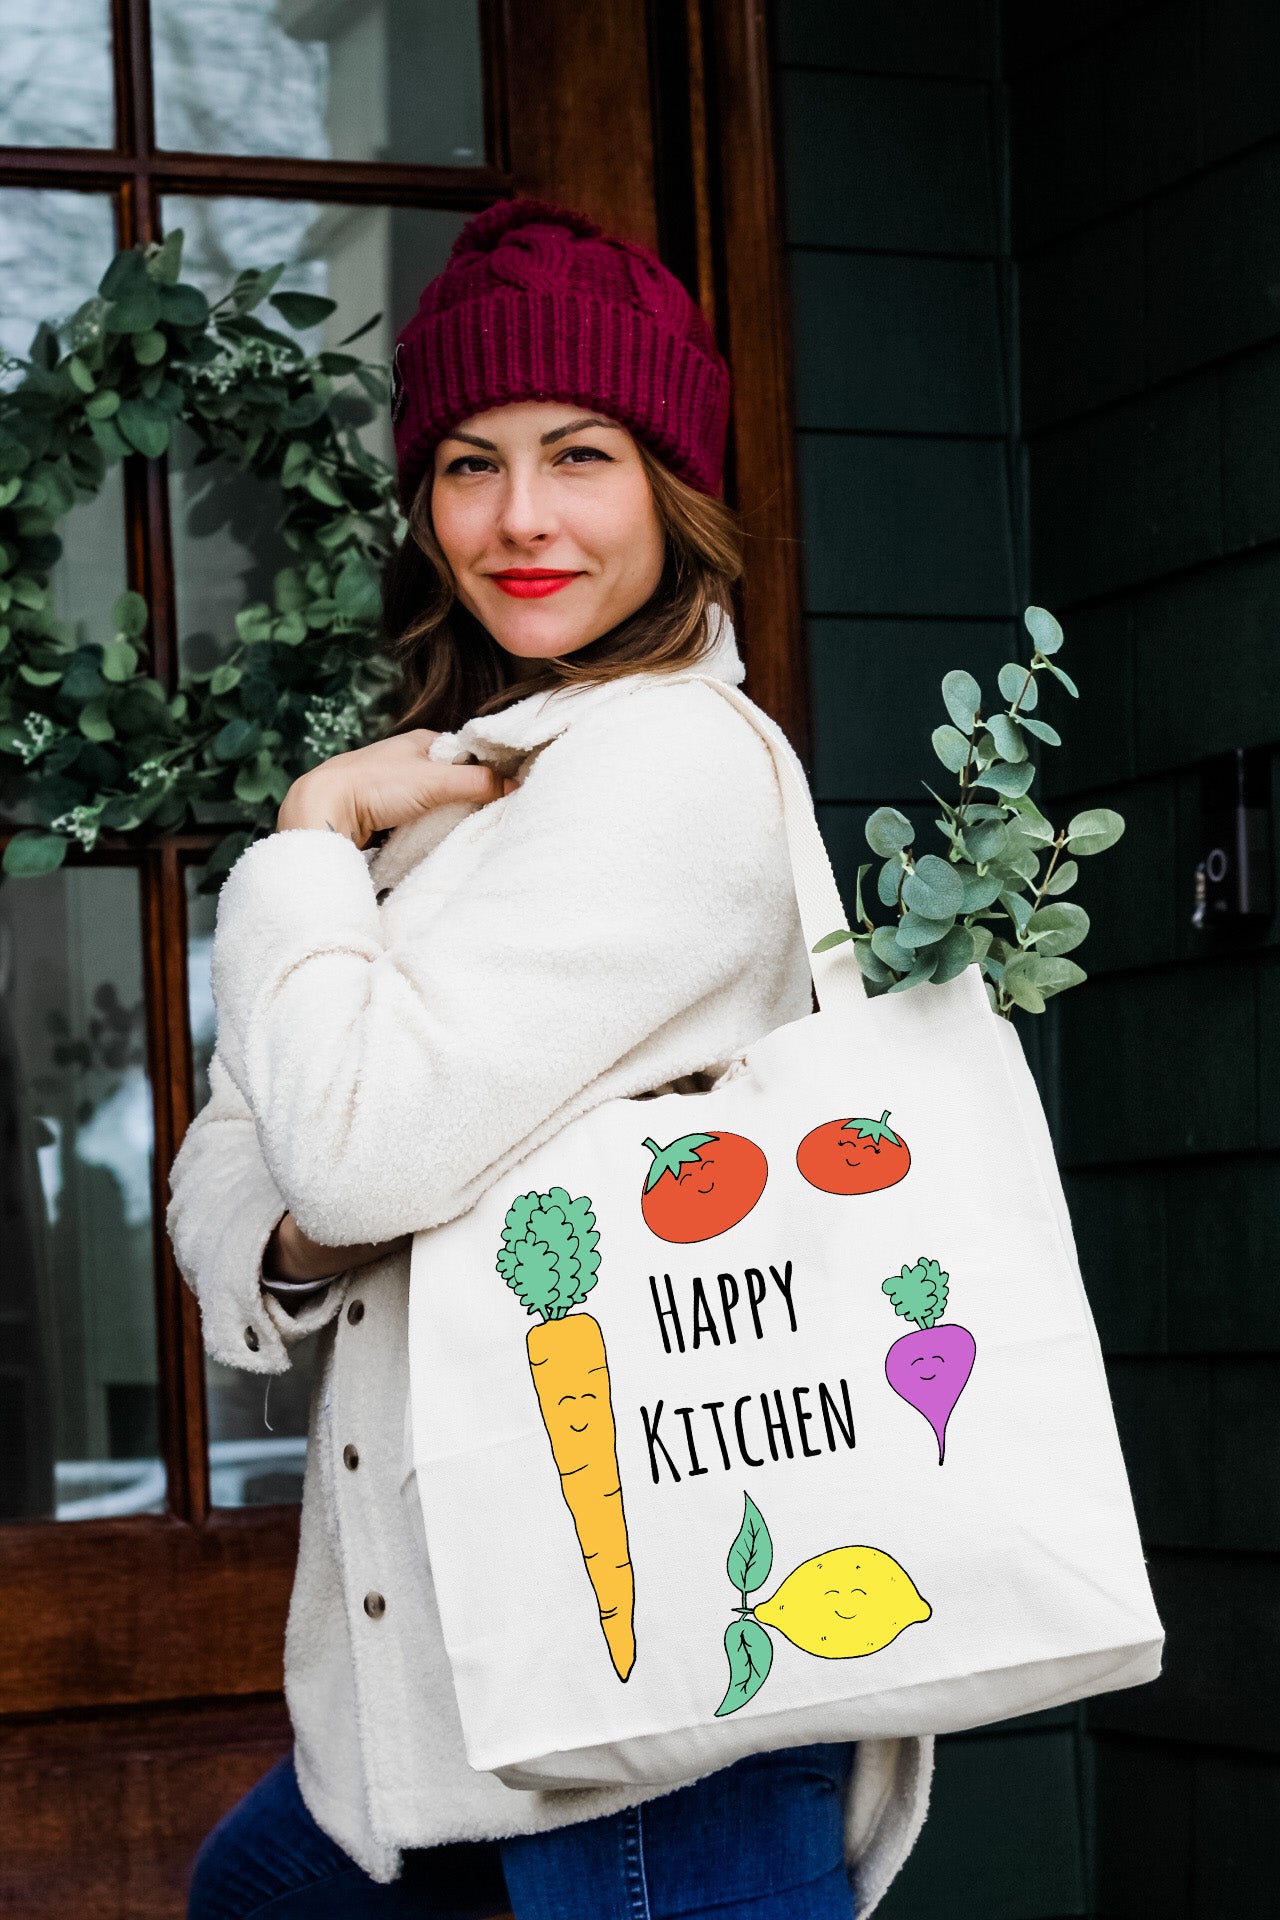 a woman holding a bag that says happy kitchen